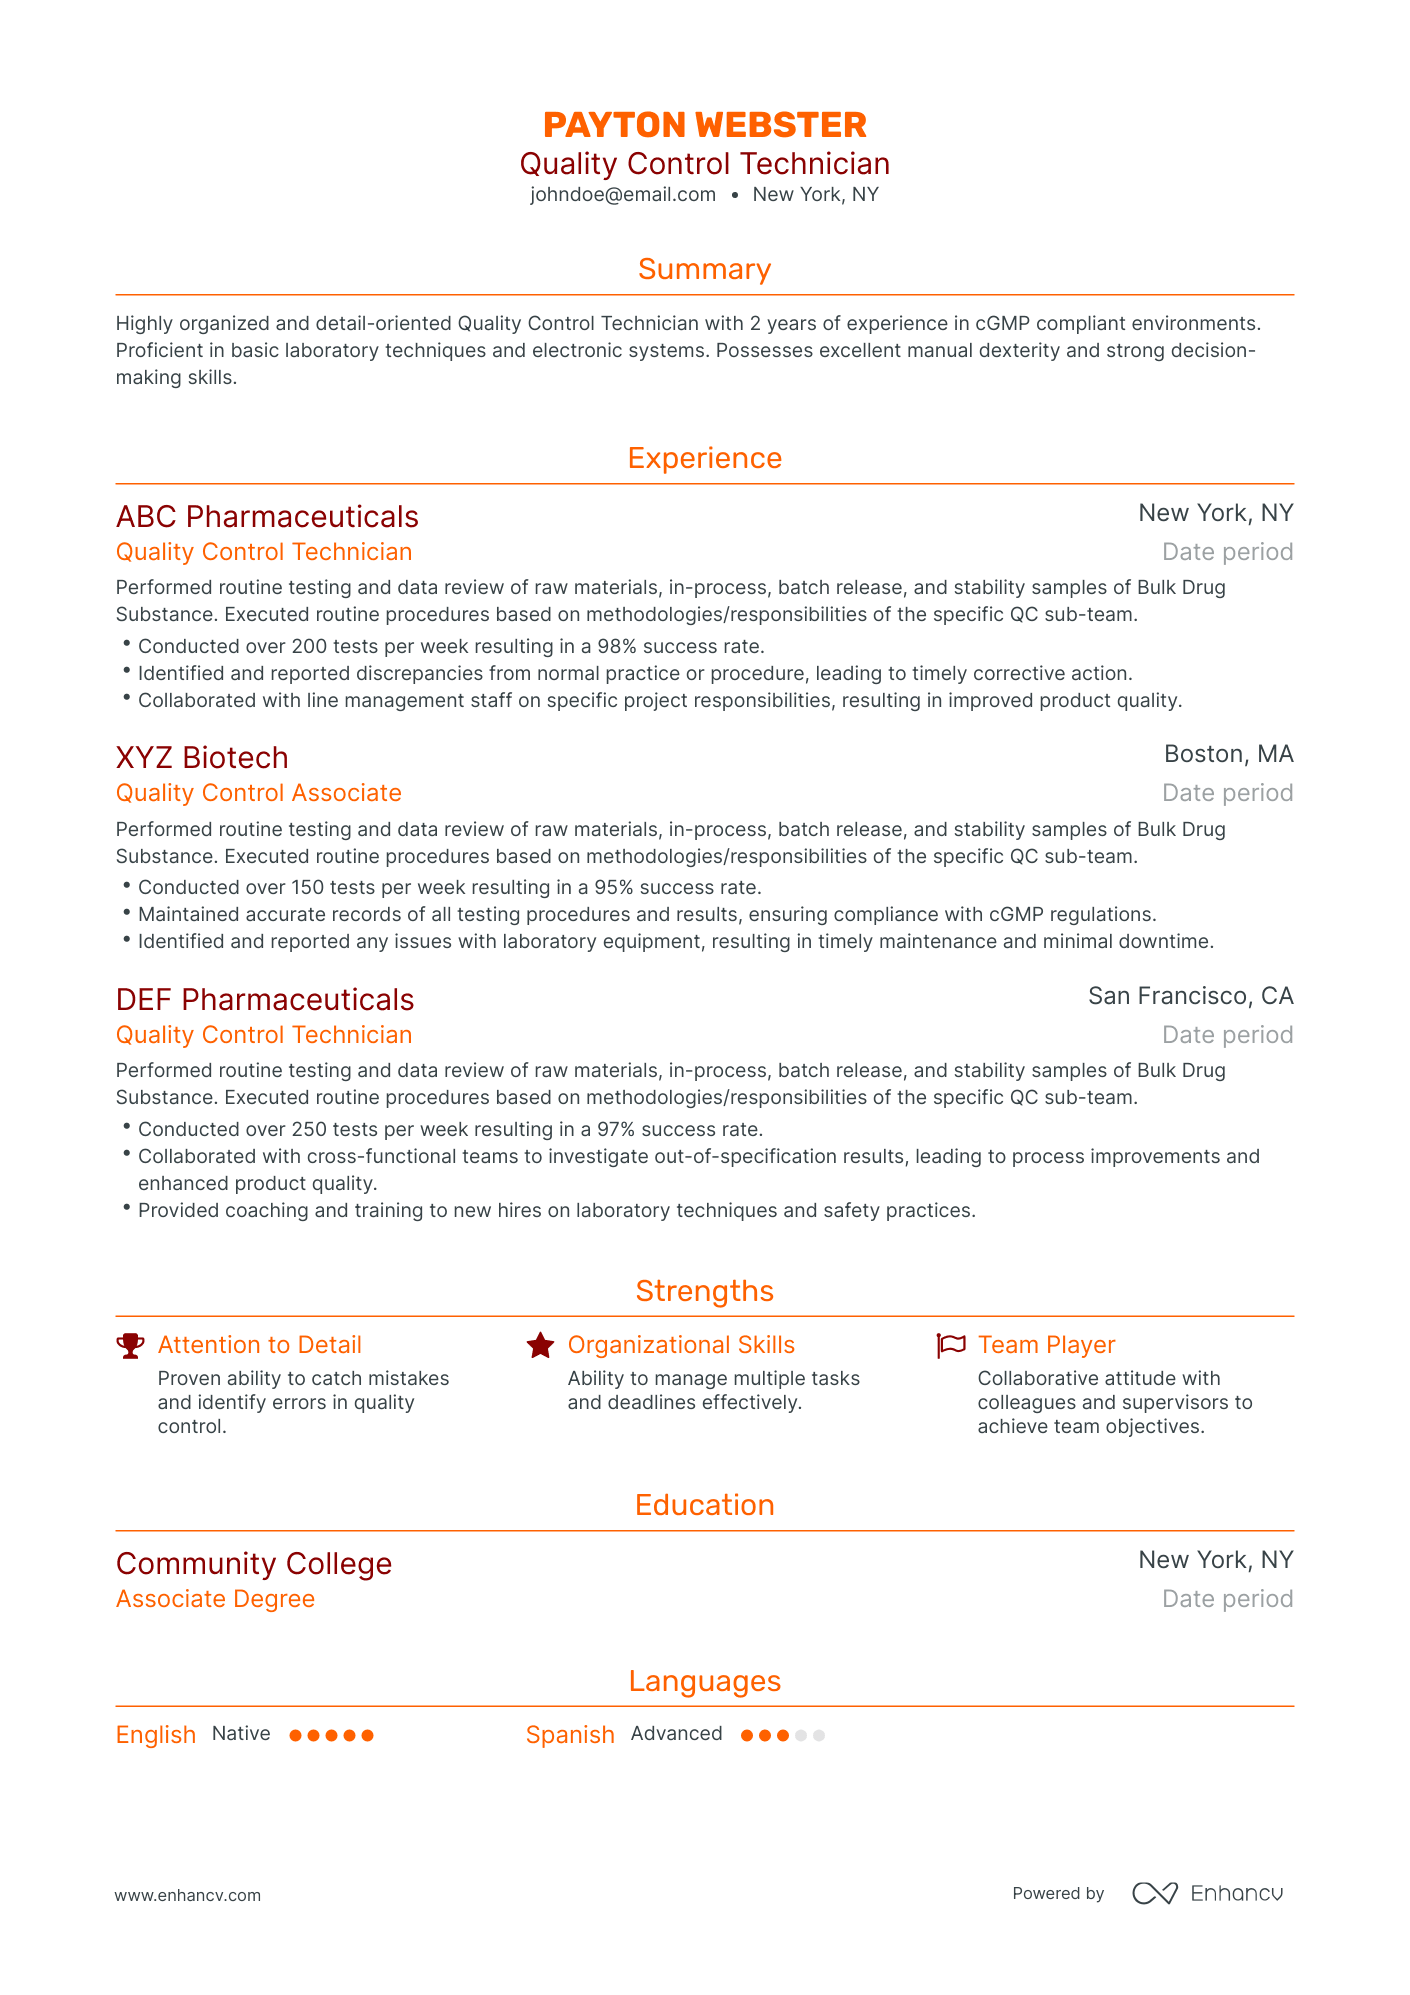 Traditional Quality Control Technician Resume Template